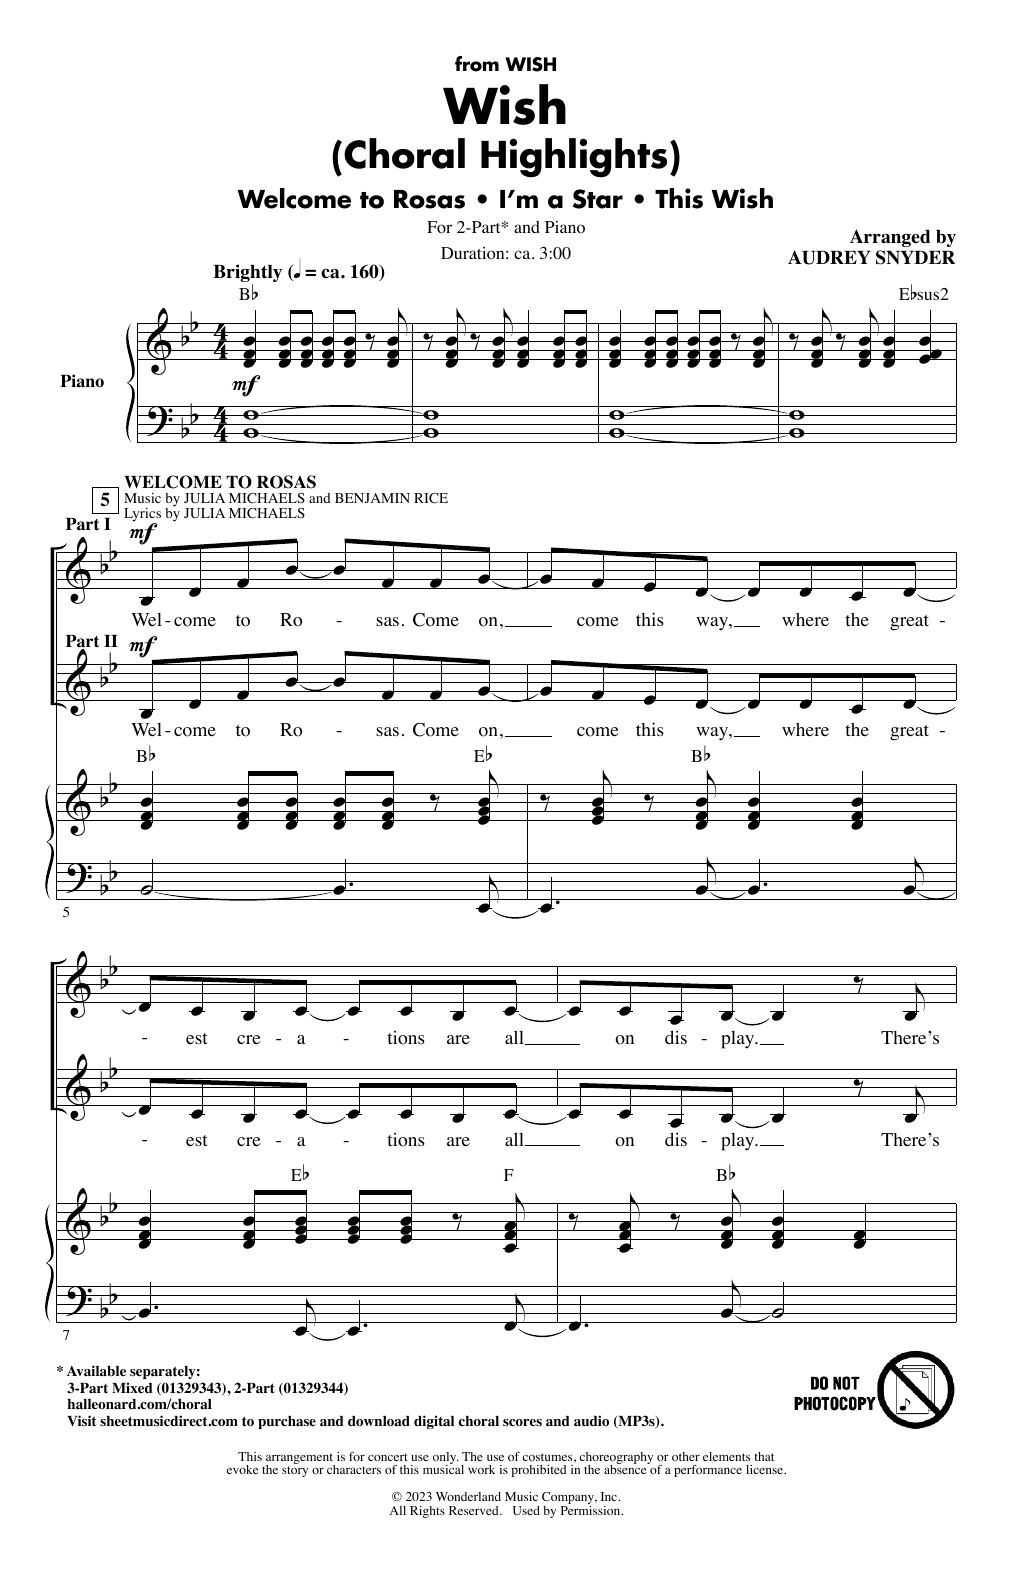 Audrey Snyder Wish (Choral Highlights) sheet music notes printable PDF score